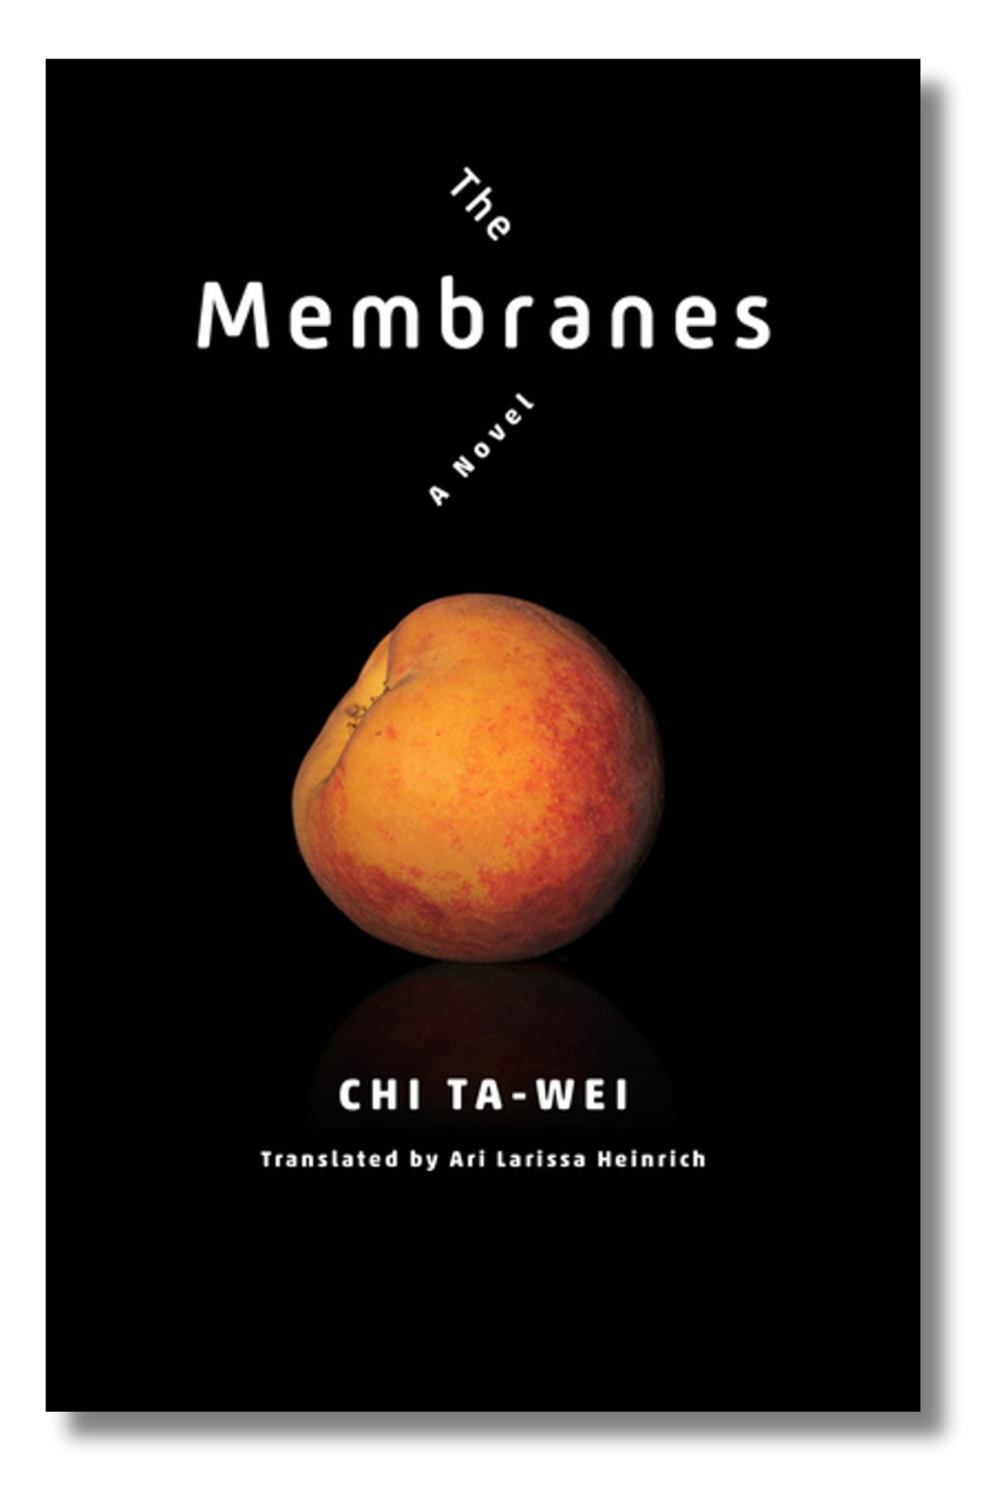 The cover of "The Membranes" by Chi Ta-Wei, translated by Ari Larissa Heinrich